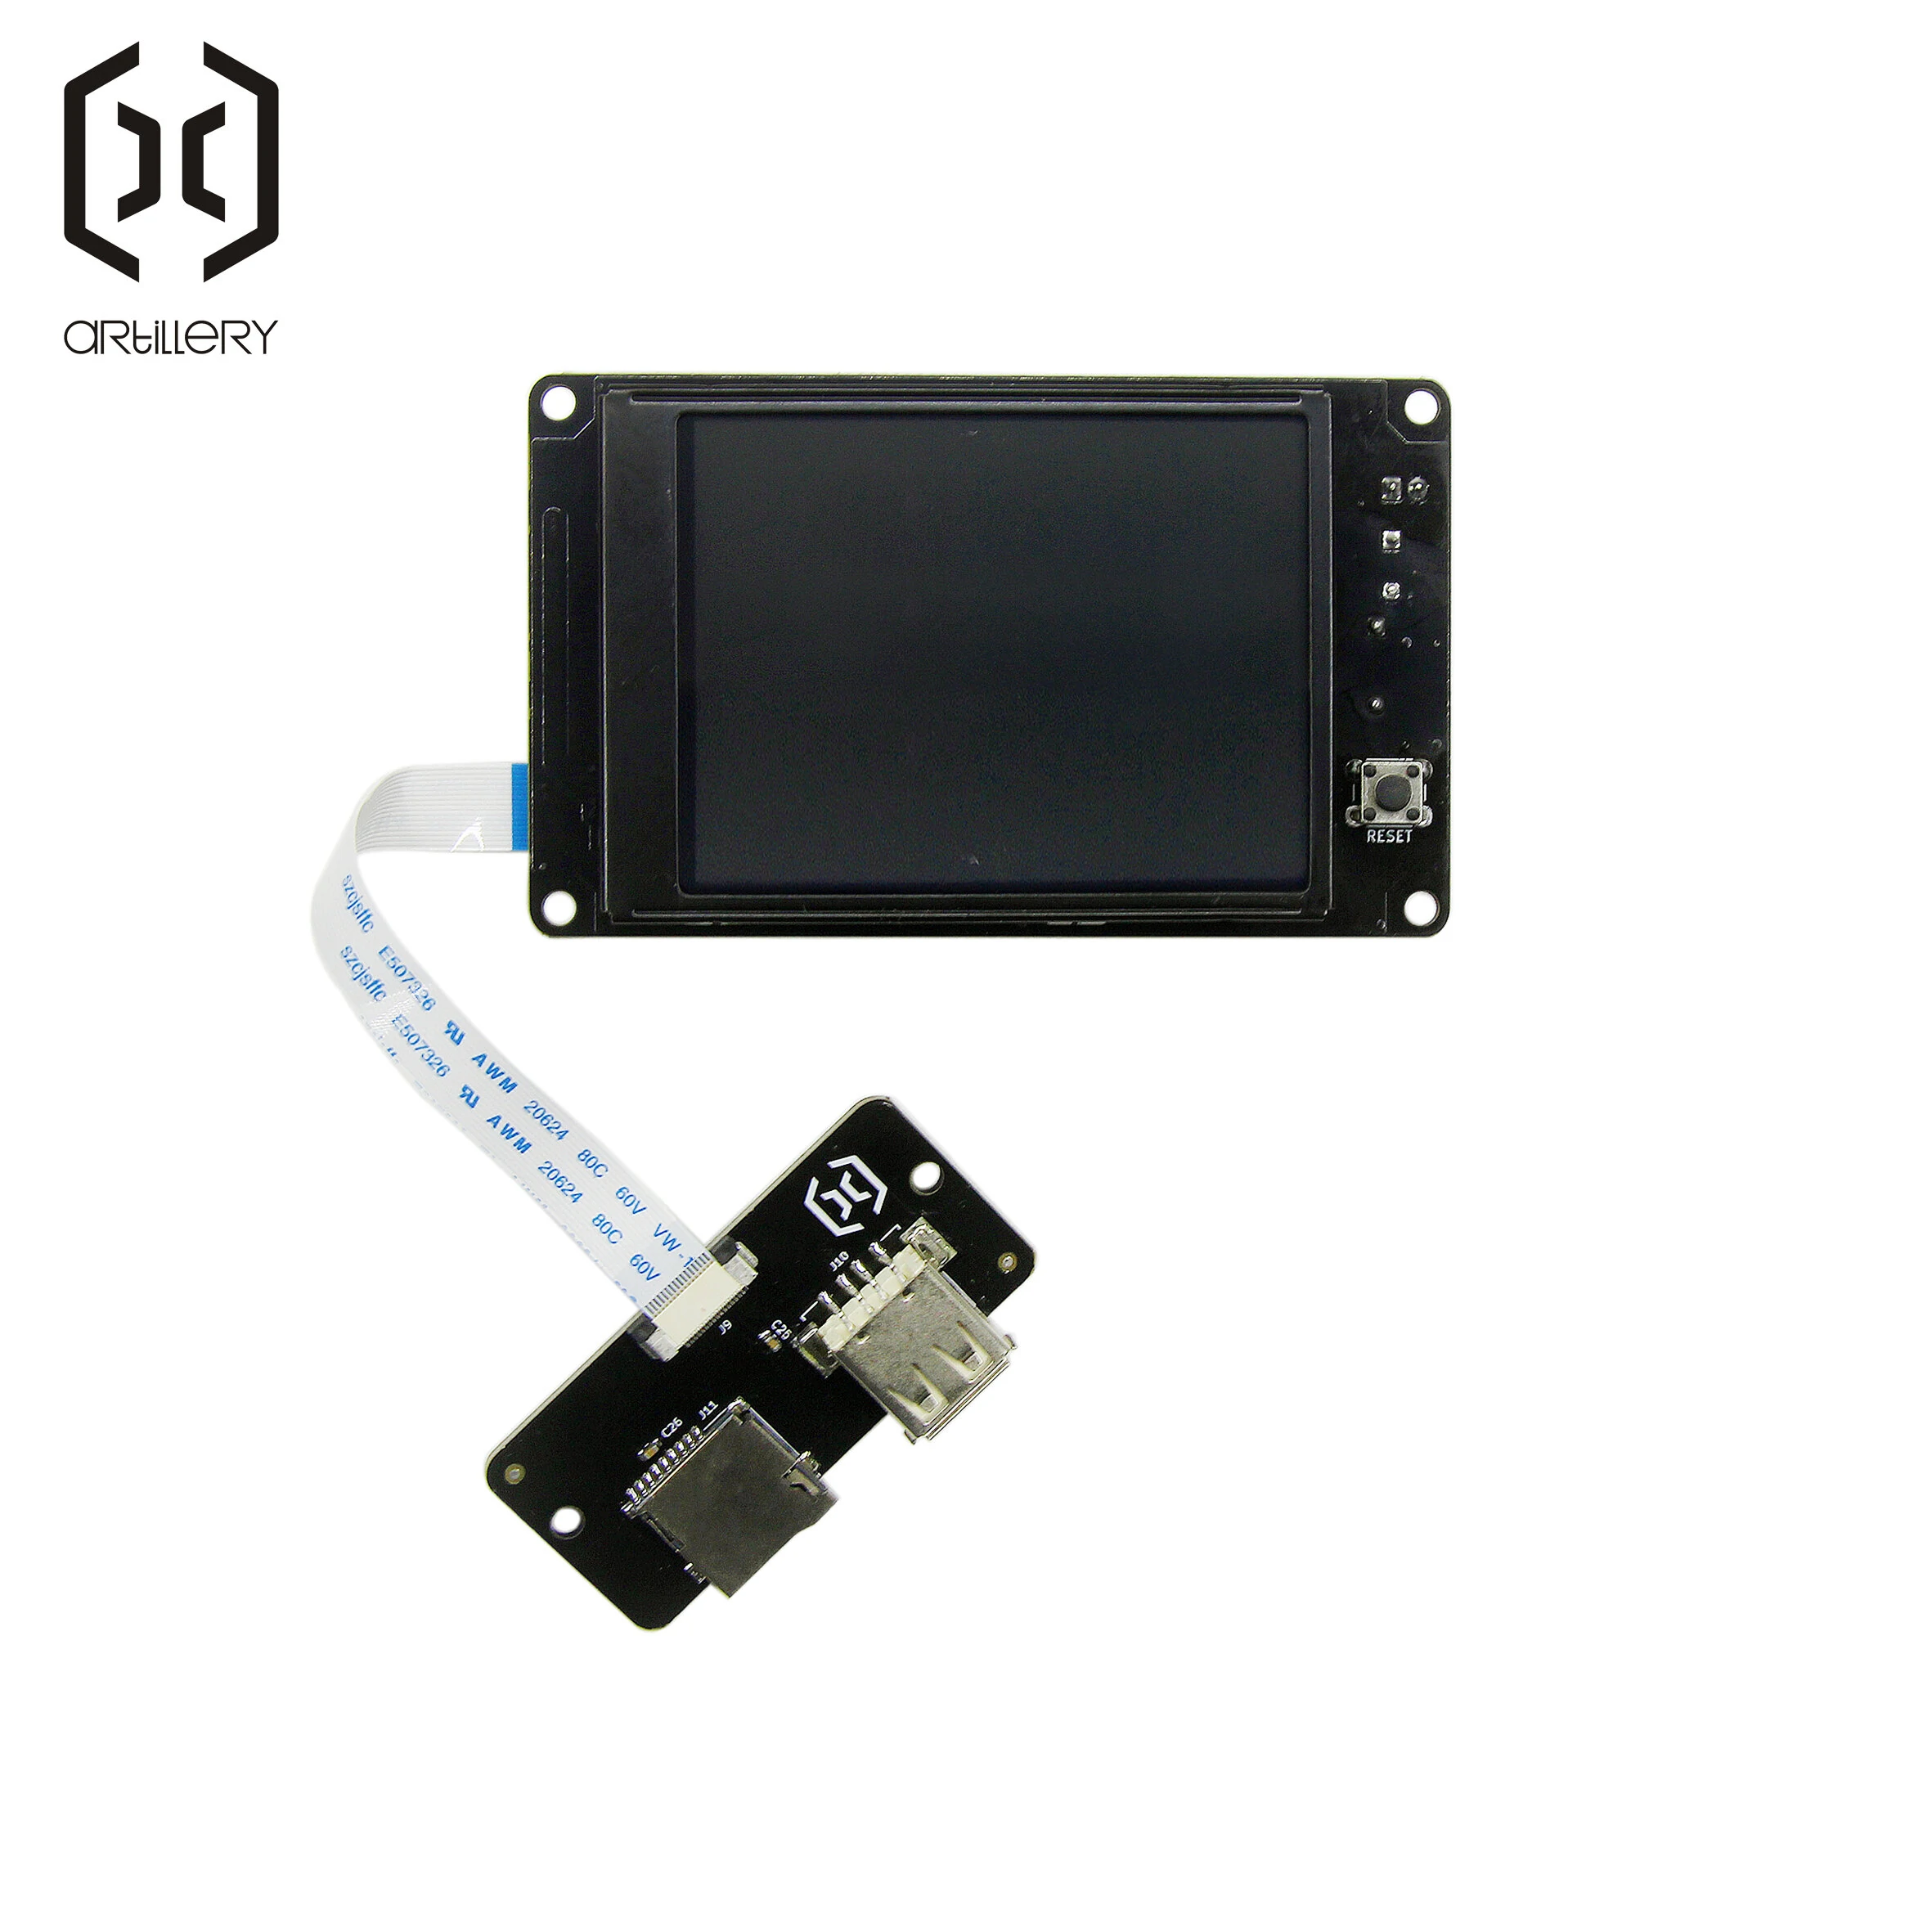 LCD Screen And TFT Board Components Touch Screen Kit for Sidewinder X2 And Genius Pro 3D Printer